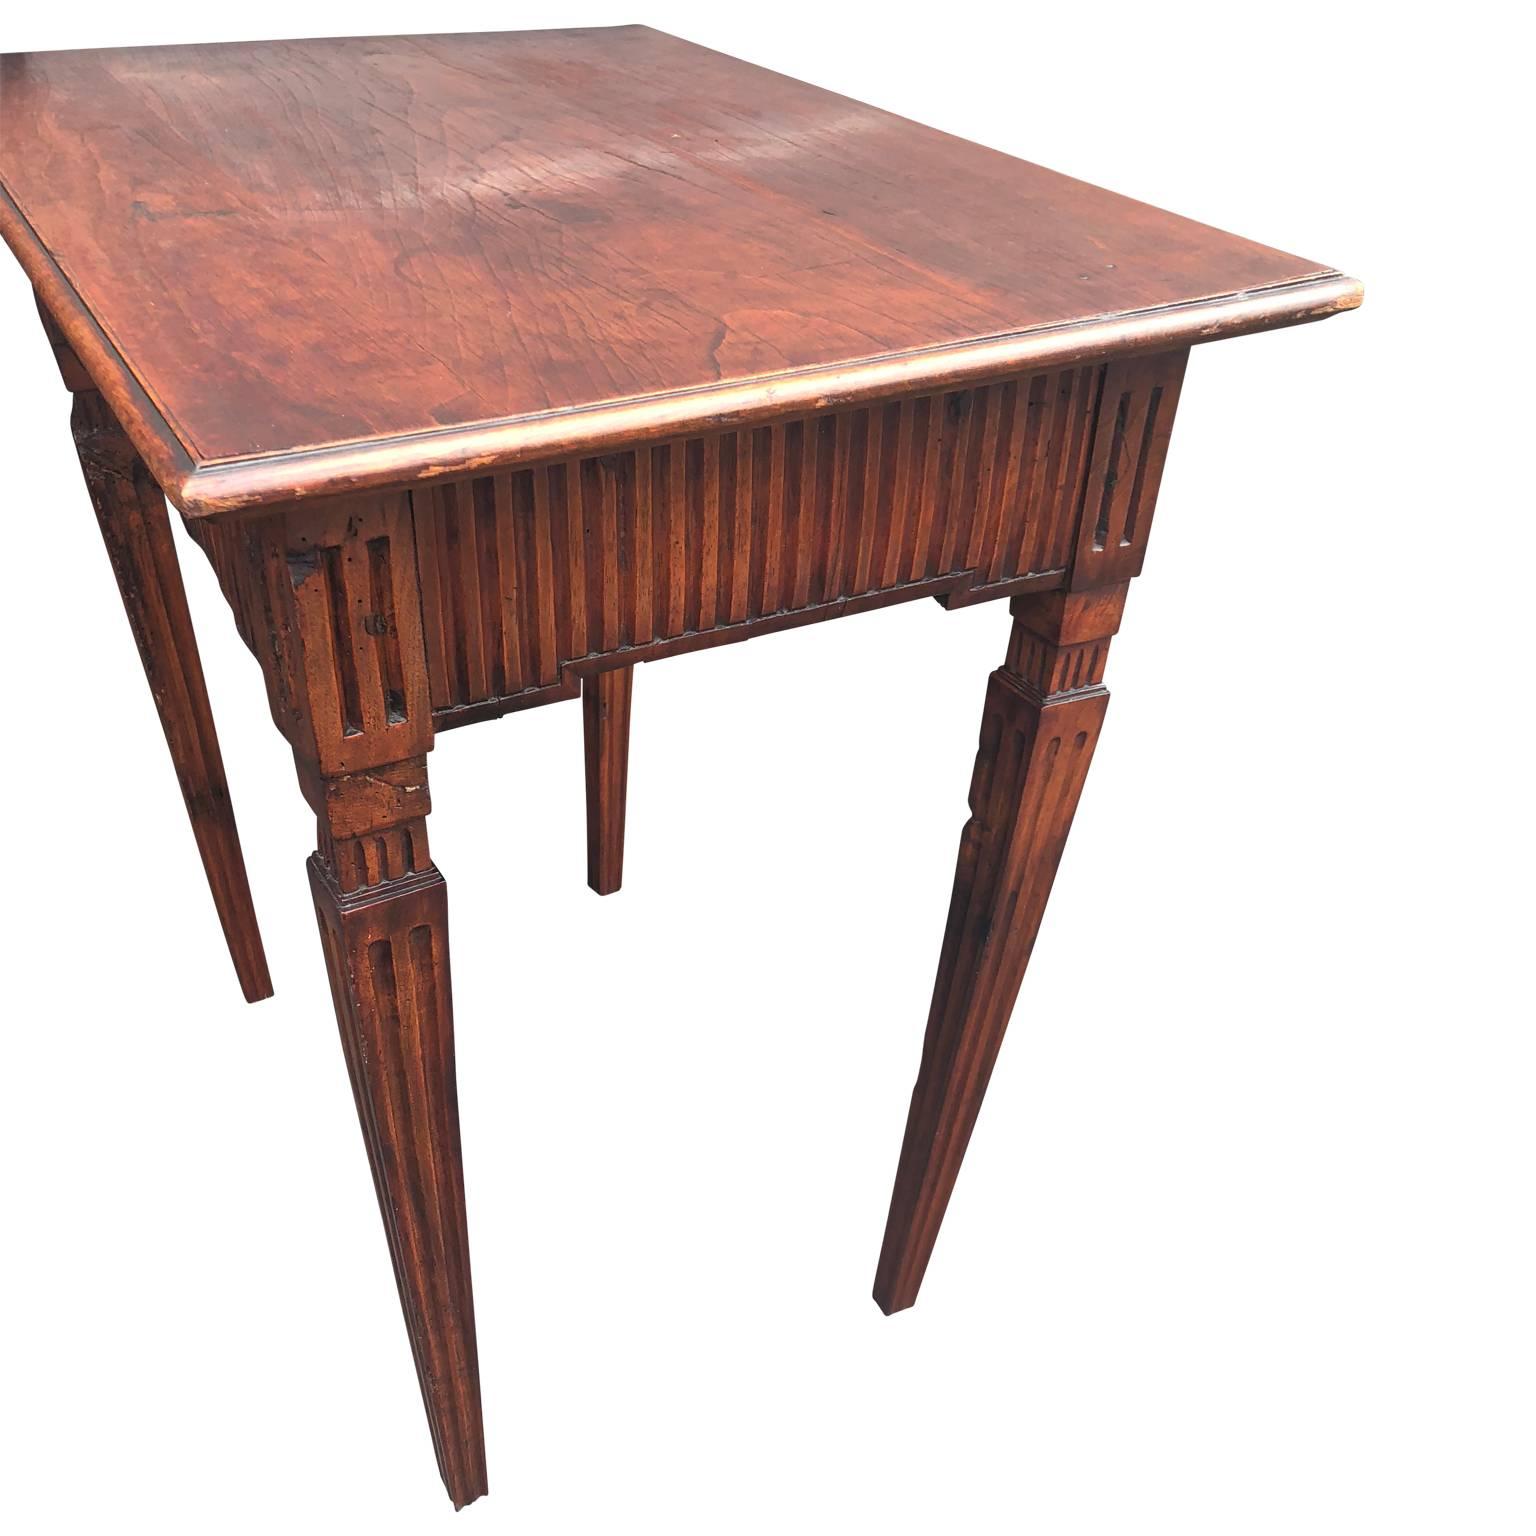 French 18th Century Table With Fluted Apron And Legs In Good Condition For Sale In Haddonfield, NJ